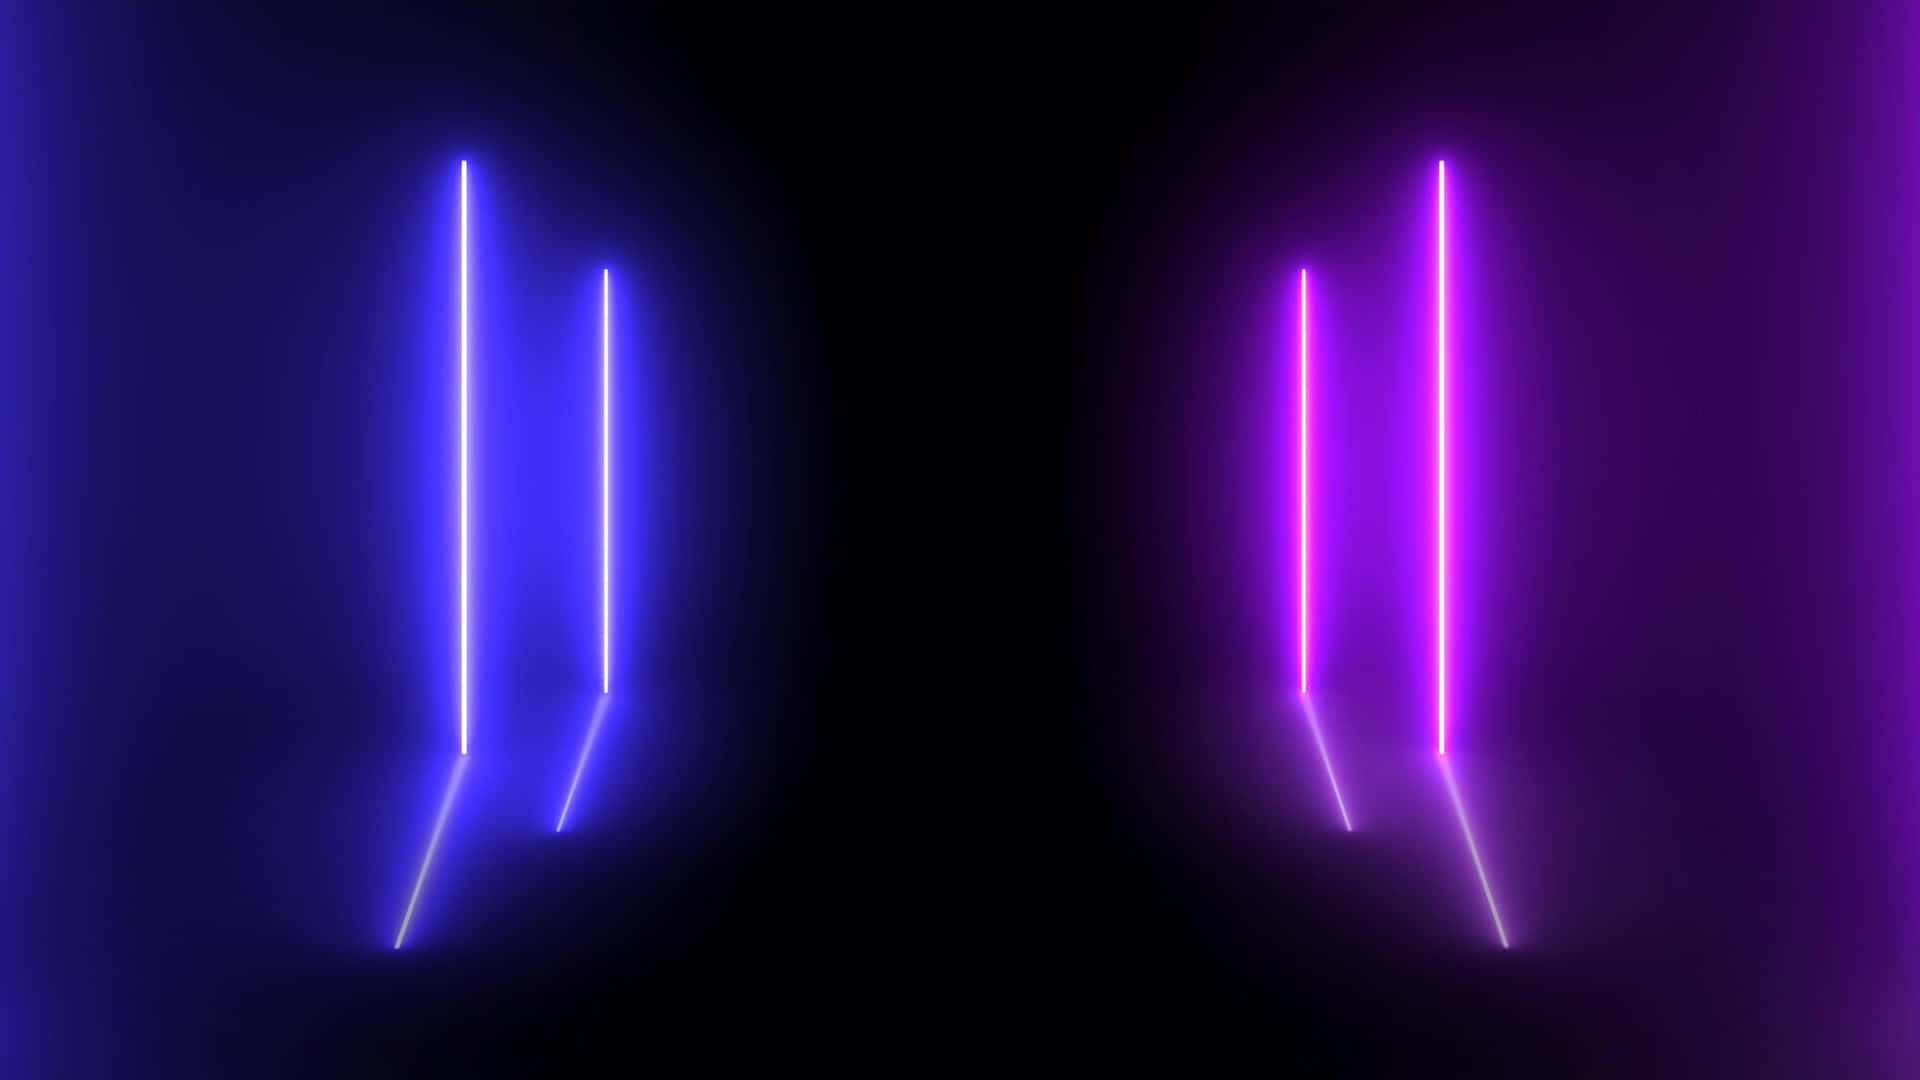 Dual Color Neon Lights Abstract Wallpaper